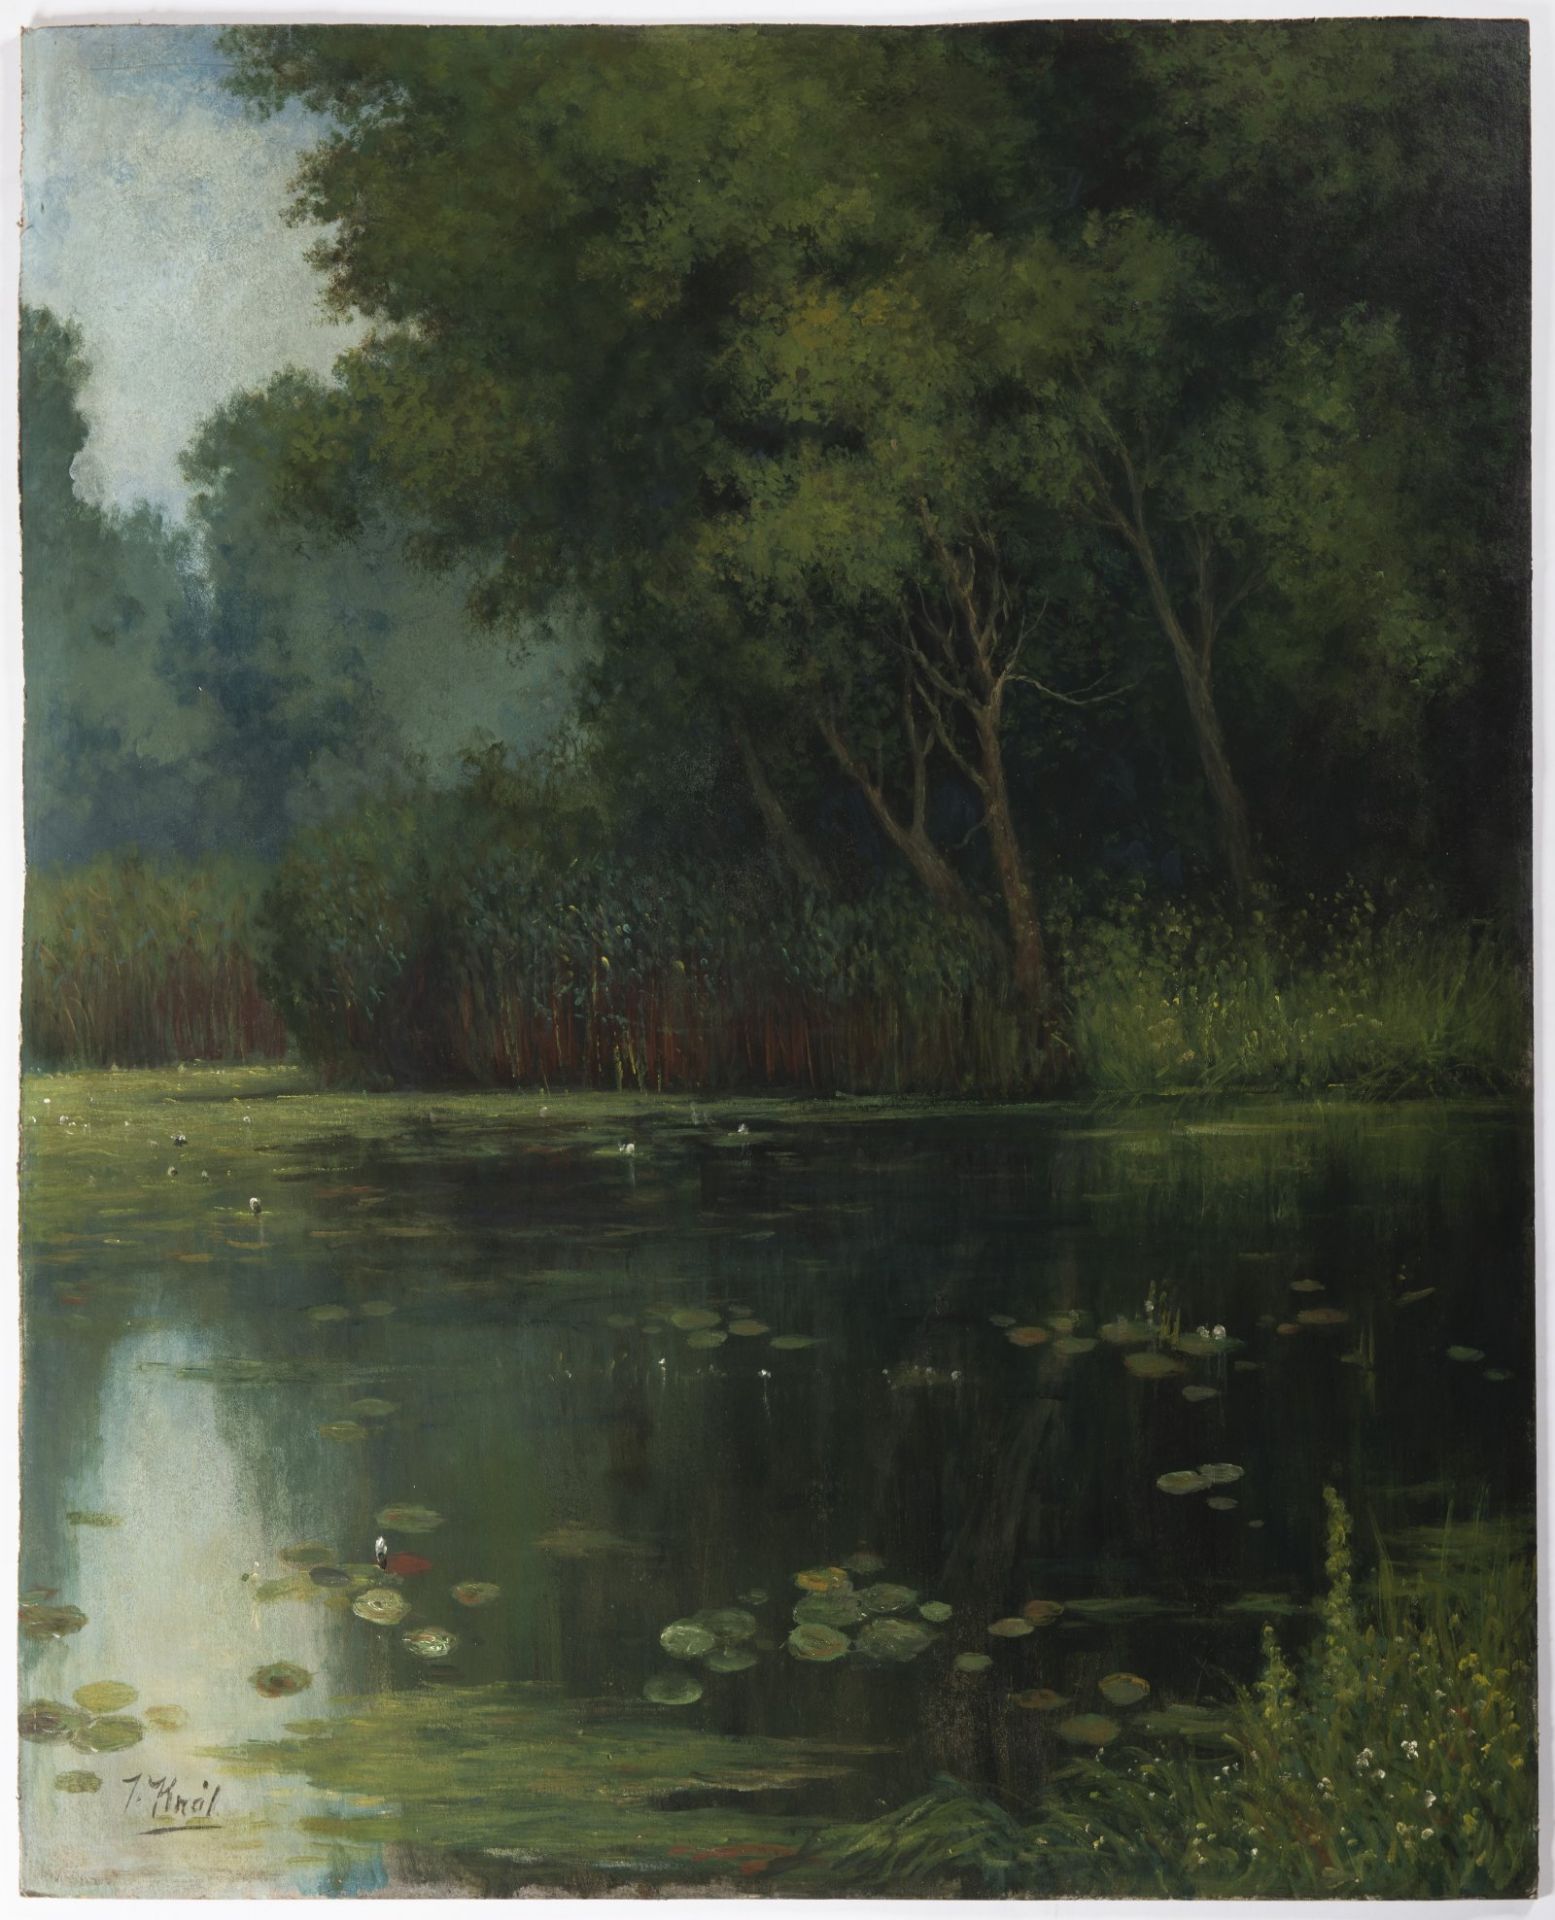 JOSEF KRÁL 1877 - 1914: POND WITH WATER LILIES Before 1907 Oil on canvas 76,5 x 61,5 cm Signed: